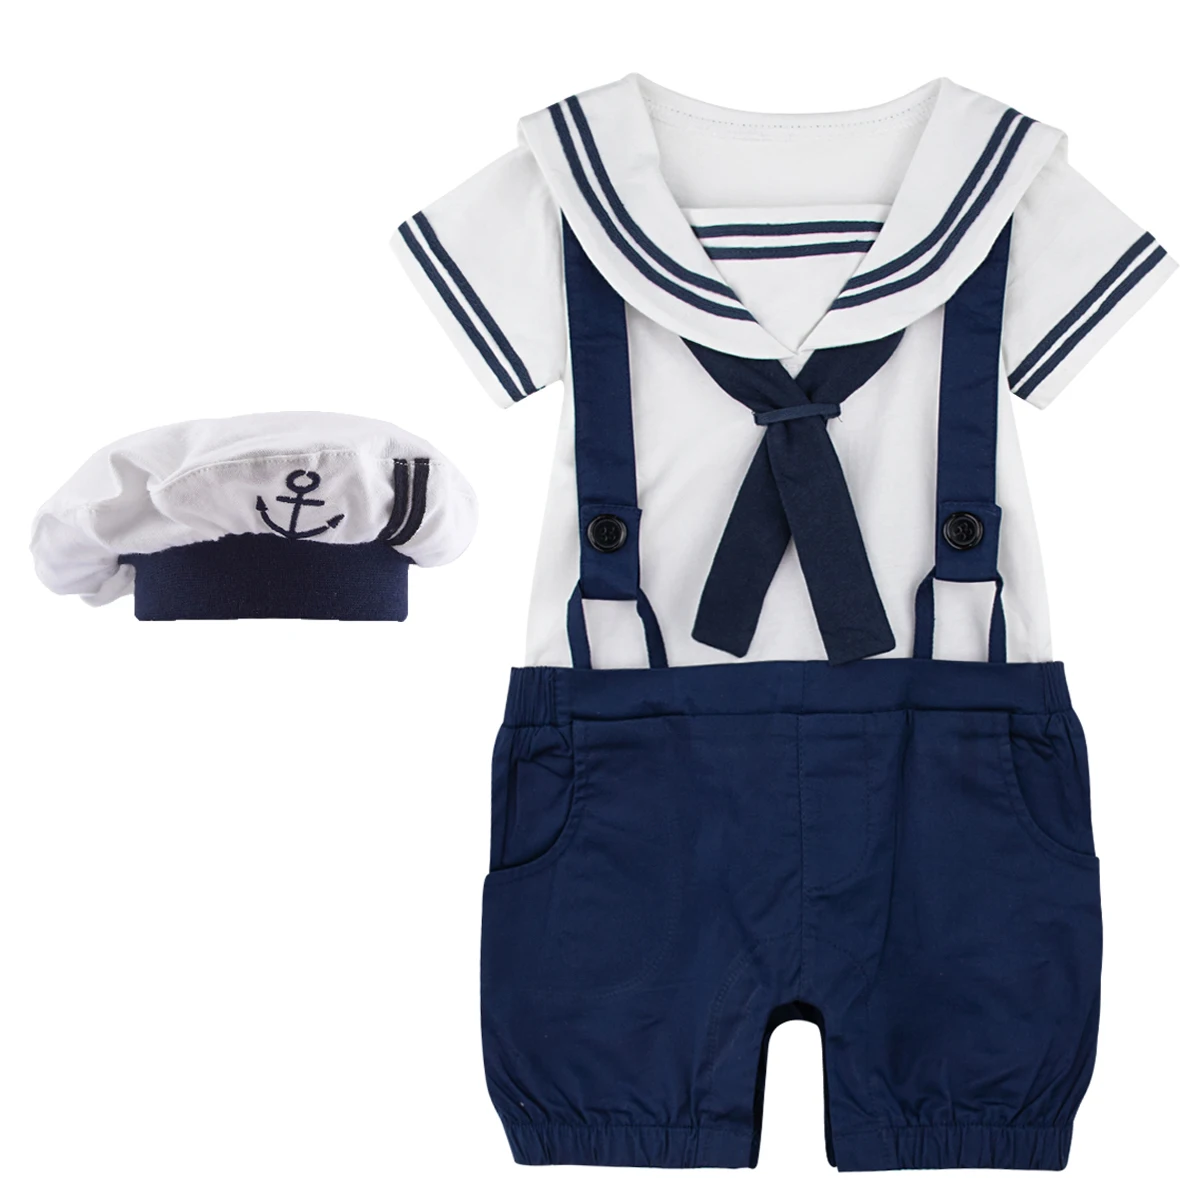 Baby Boy Sailor Romper Infant Halloween Costume Newborn Nautical Sailor Navy Jumpsuit Mariner Outfits with Hat